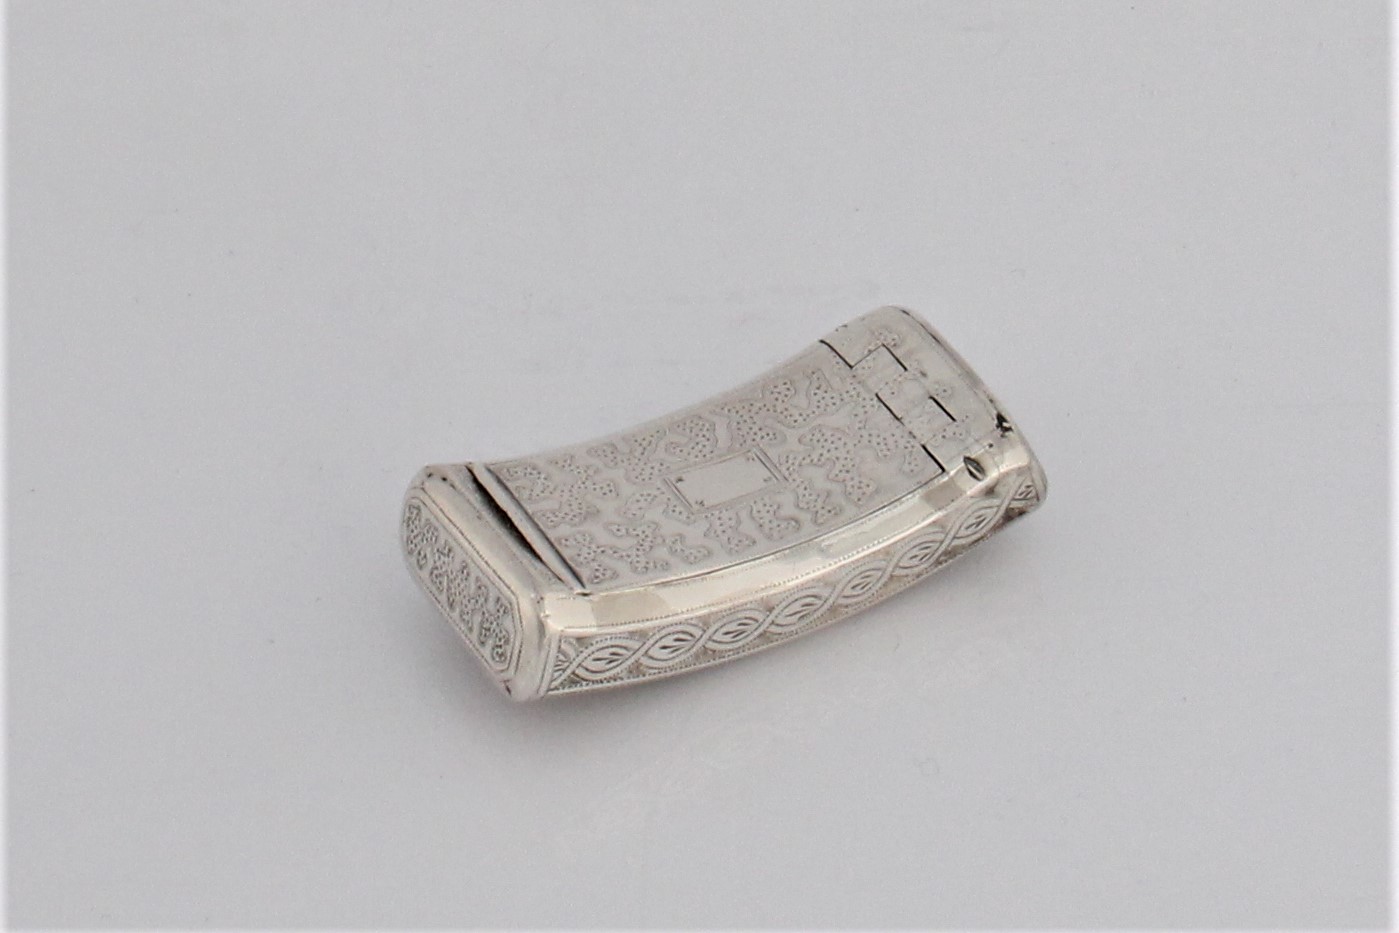 A Georgian silver snuff box with marks for Birmingham - Image 5 of 5